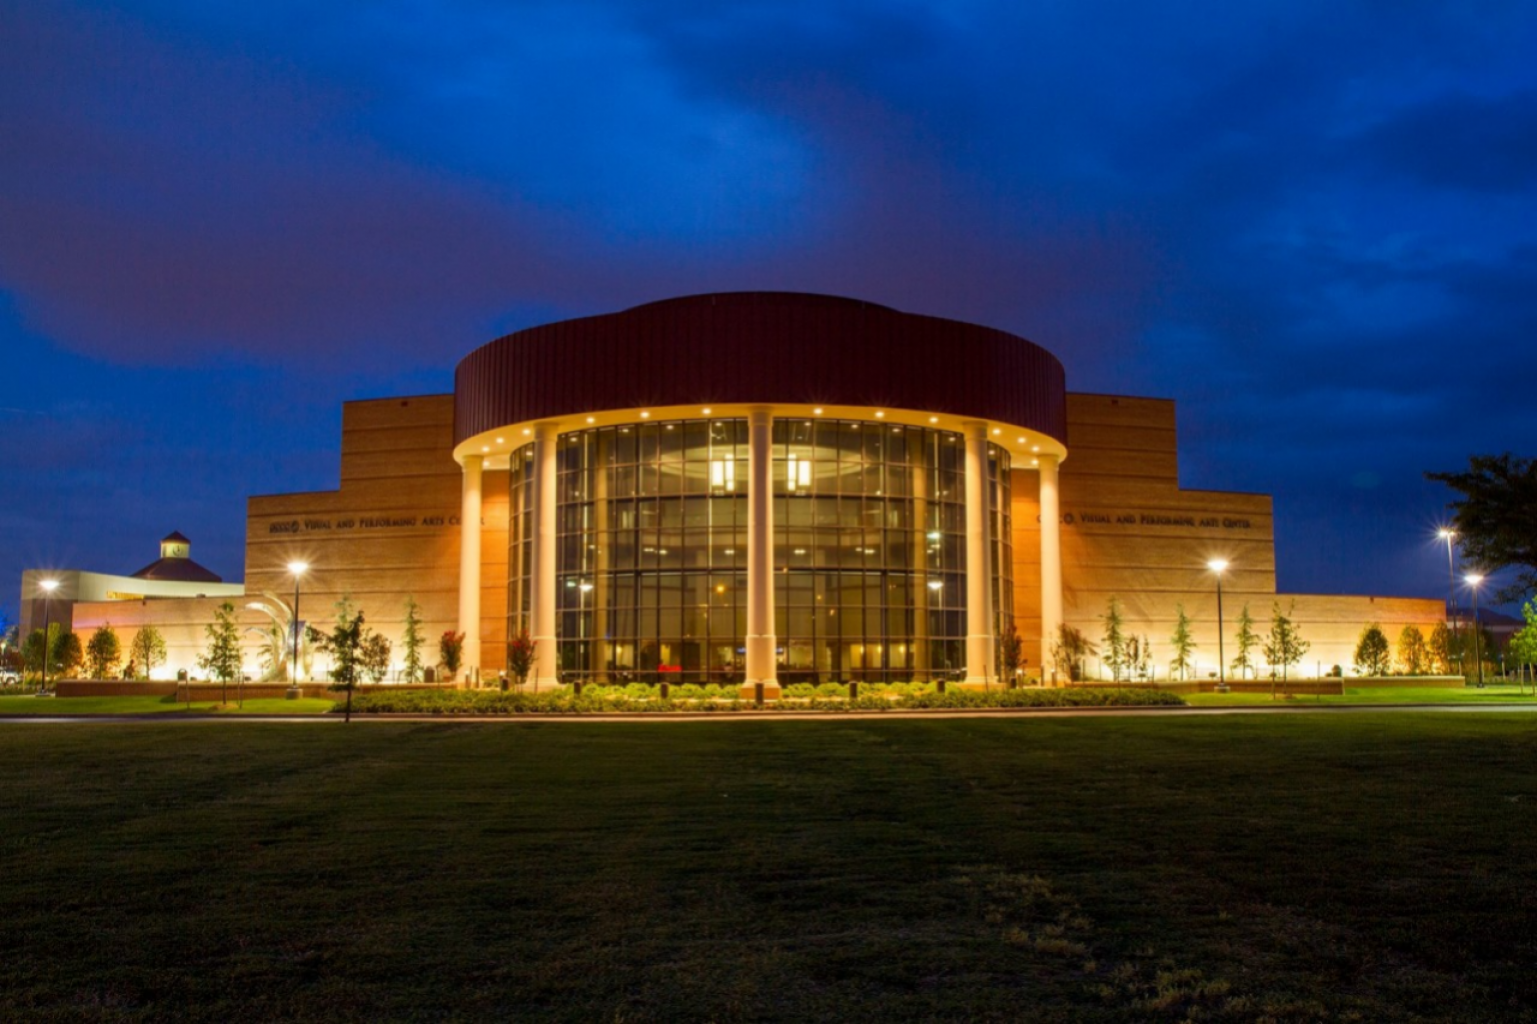 OCCC VISUAL AND PERFORMING ARTS CENTER  REOPENS WITH HYBRID SEASON